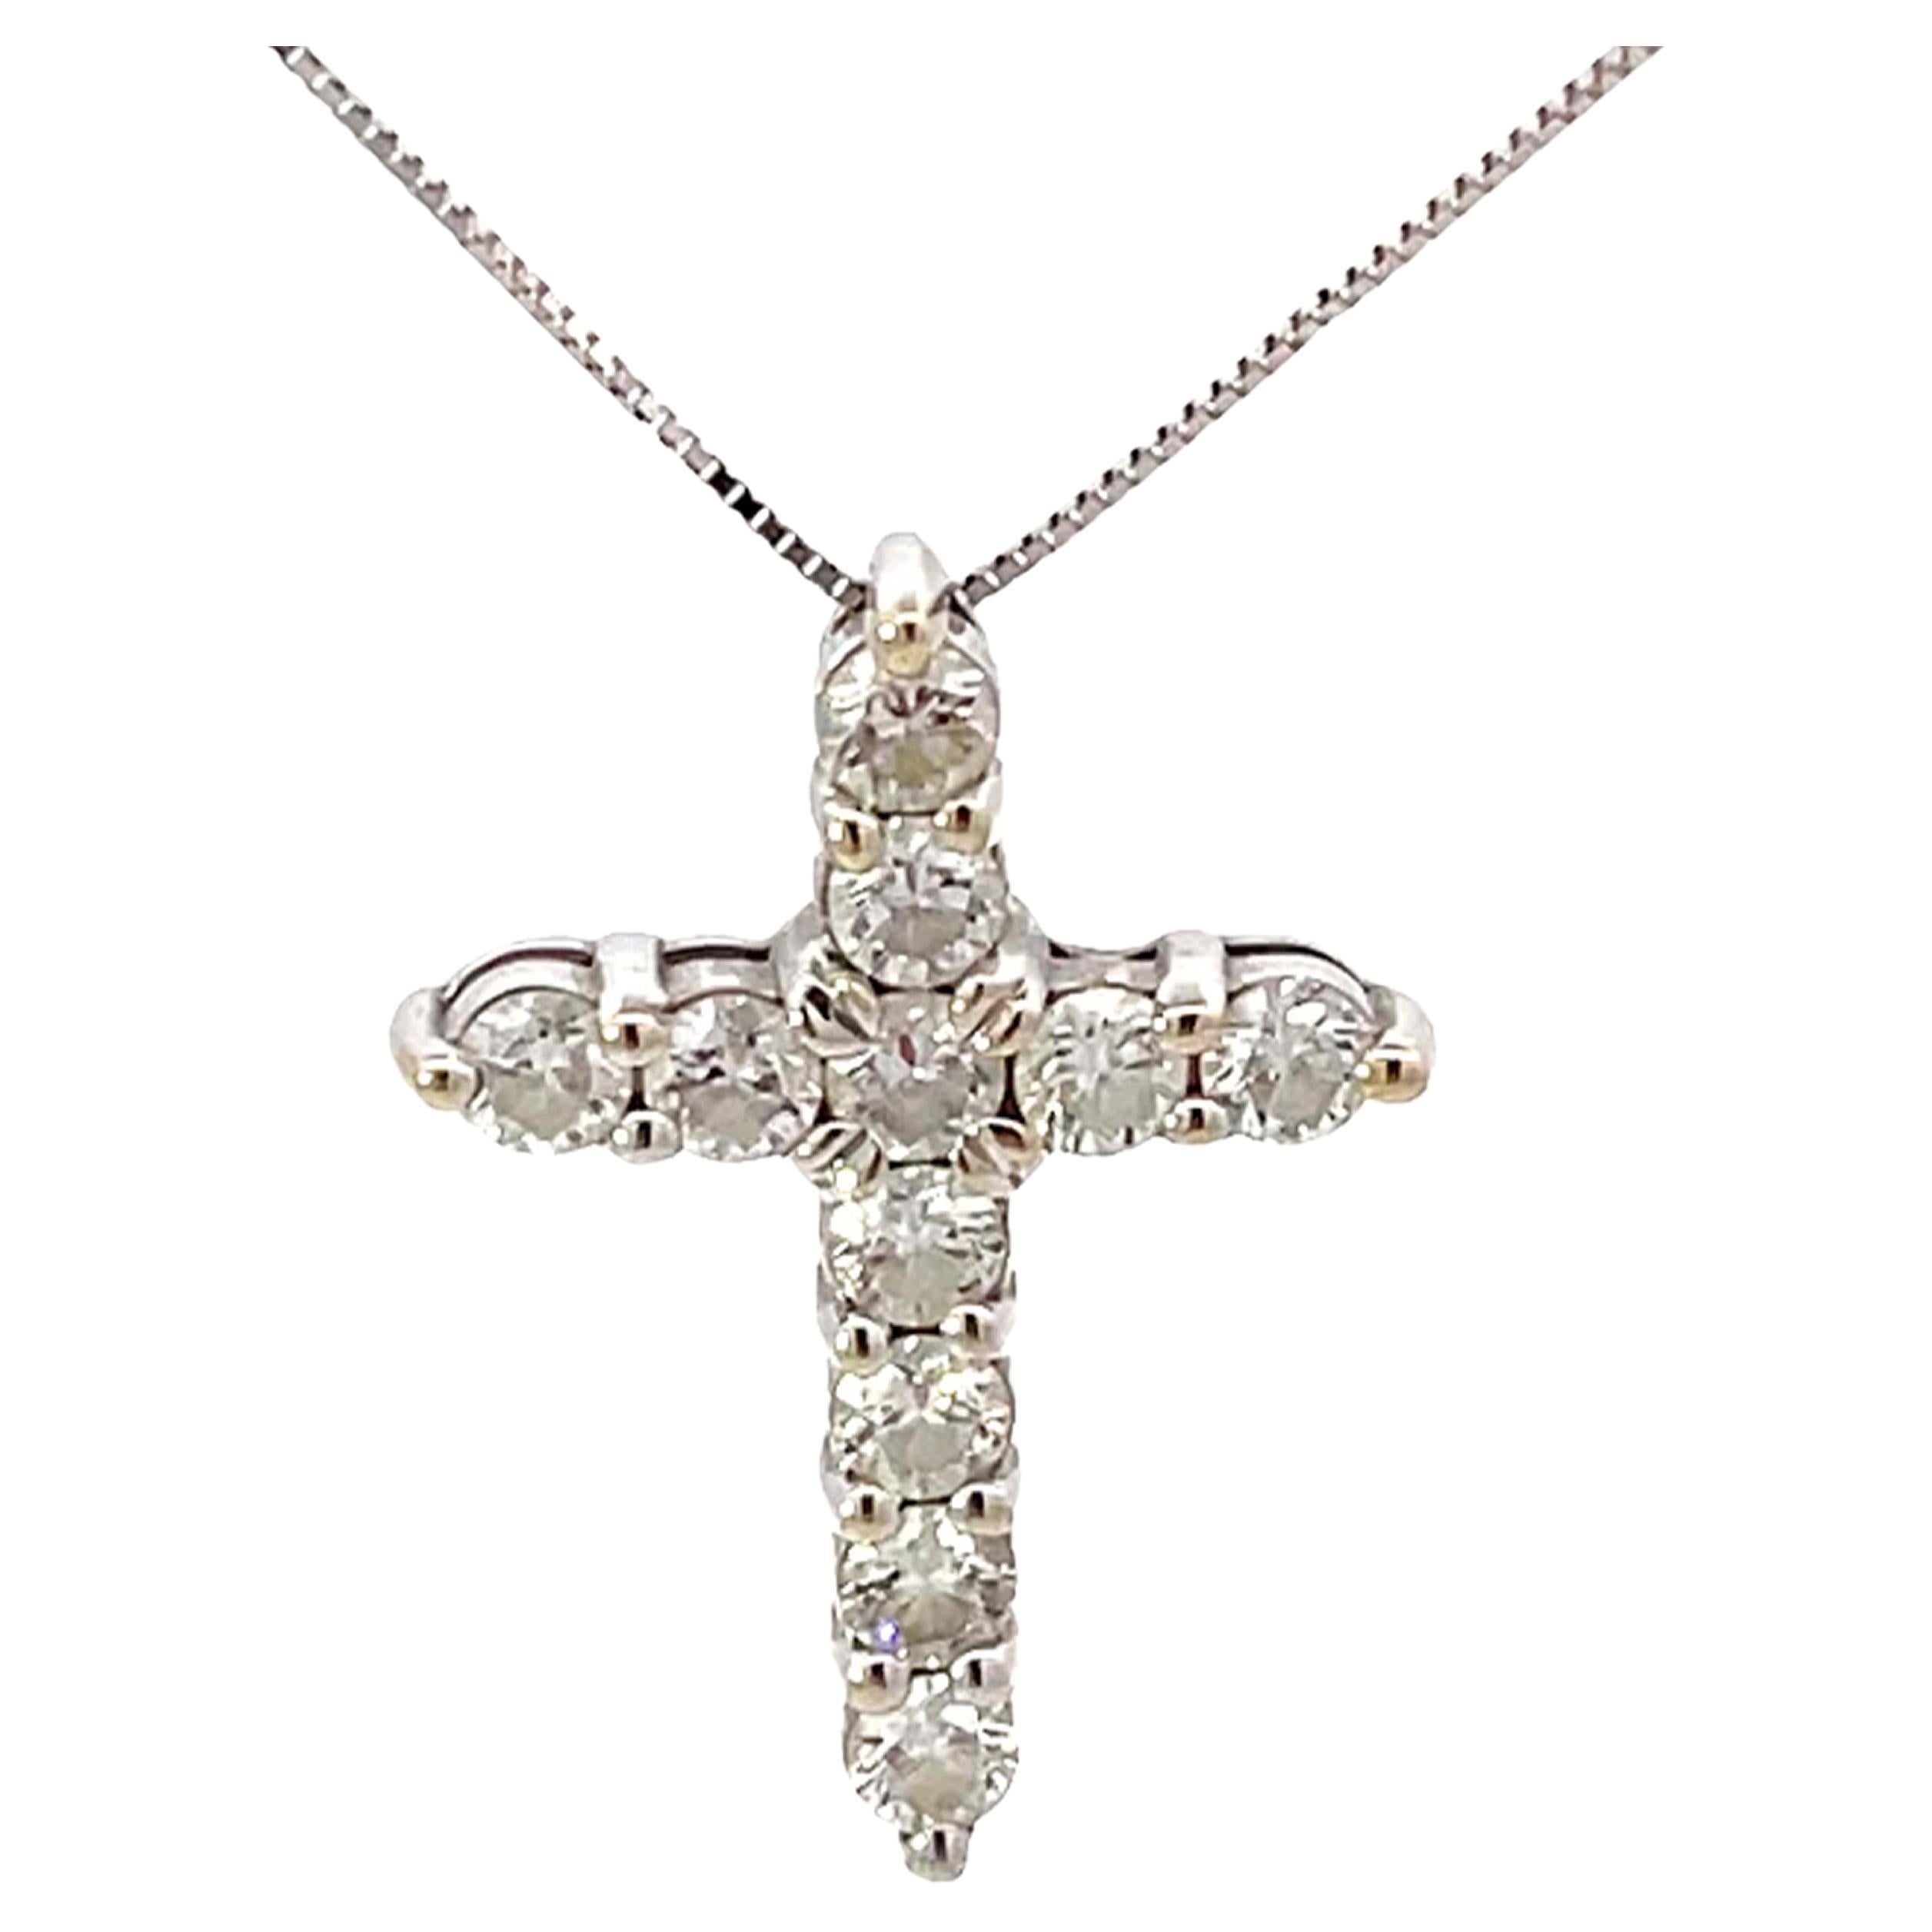 Diamond Cross Necklace Solid 14k White Gold